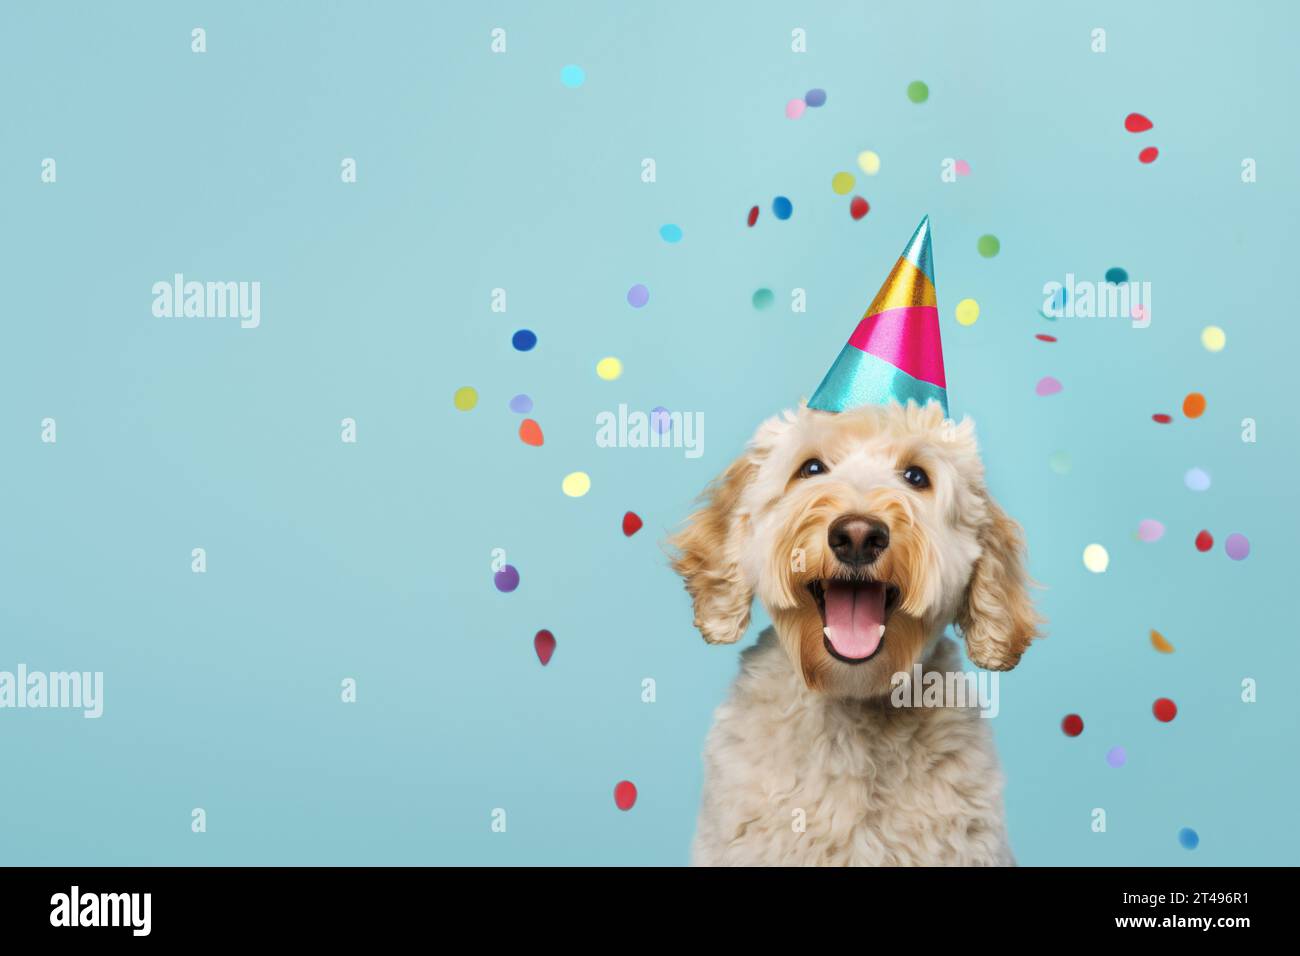 Happy cute labradoodle dog wearing a party hat celebrating at a birthday party, surrounding by falling confetti Stock Photo